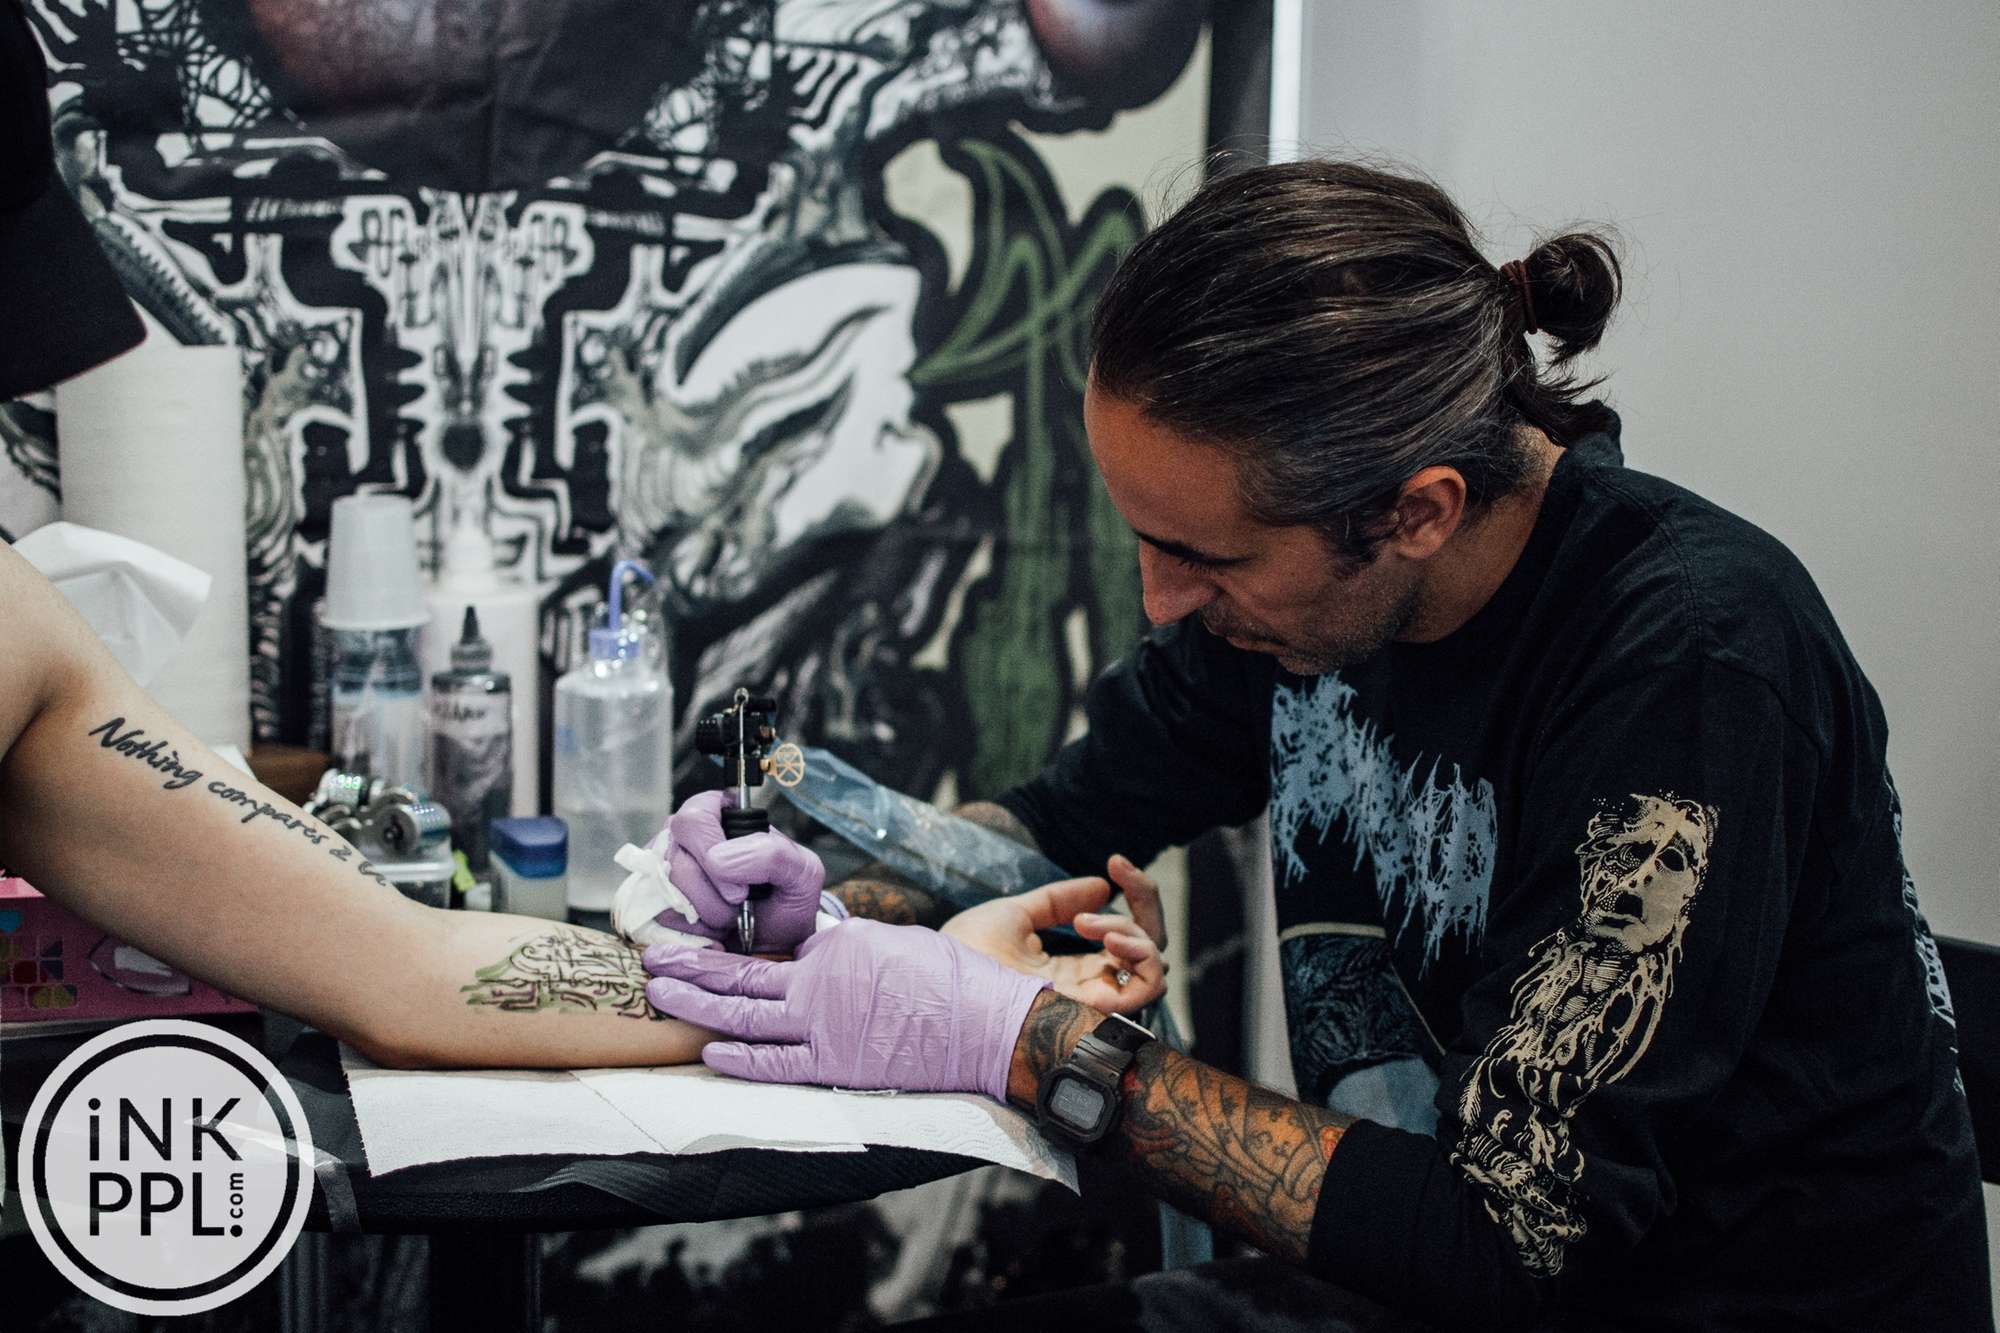 Russian Tattoo Expo / Barber Connect Russia | iNKPPL